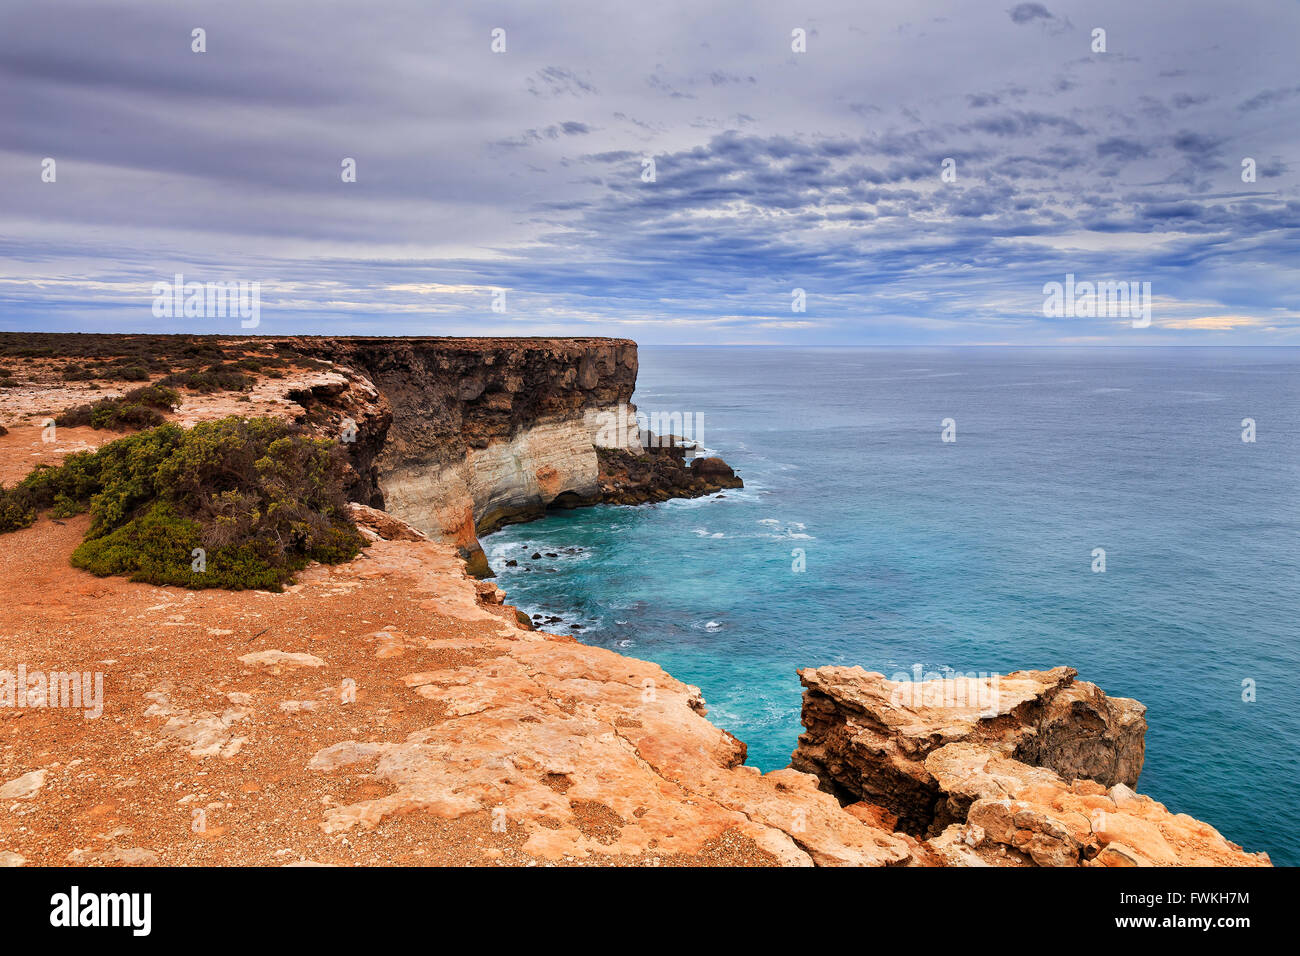 Bend of rocky dangerous geological limestone Nullarbor plato towards Great Australian bight in South Australia on a cloudy say. Stock Photo